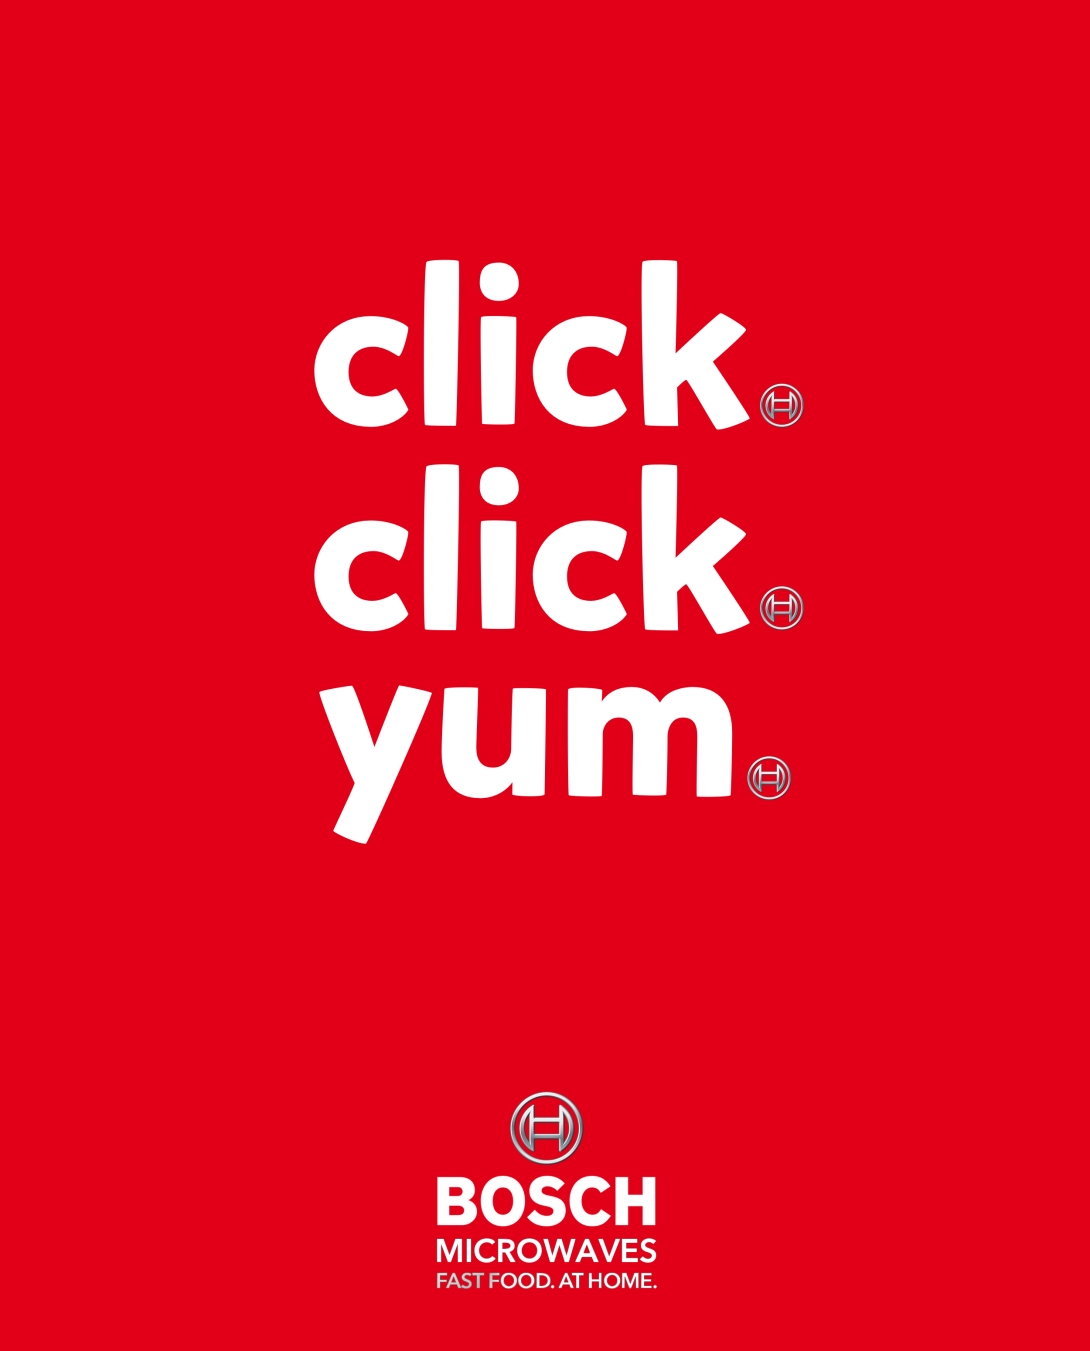 advertising concept for a microwave brand - click click yum - fast food at home